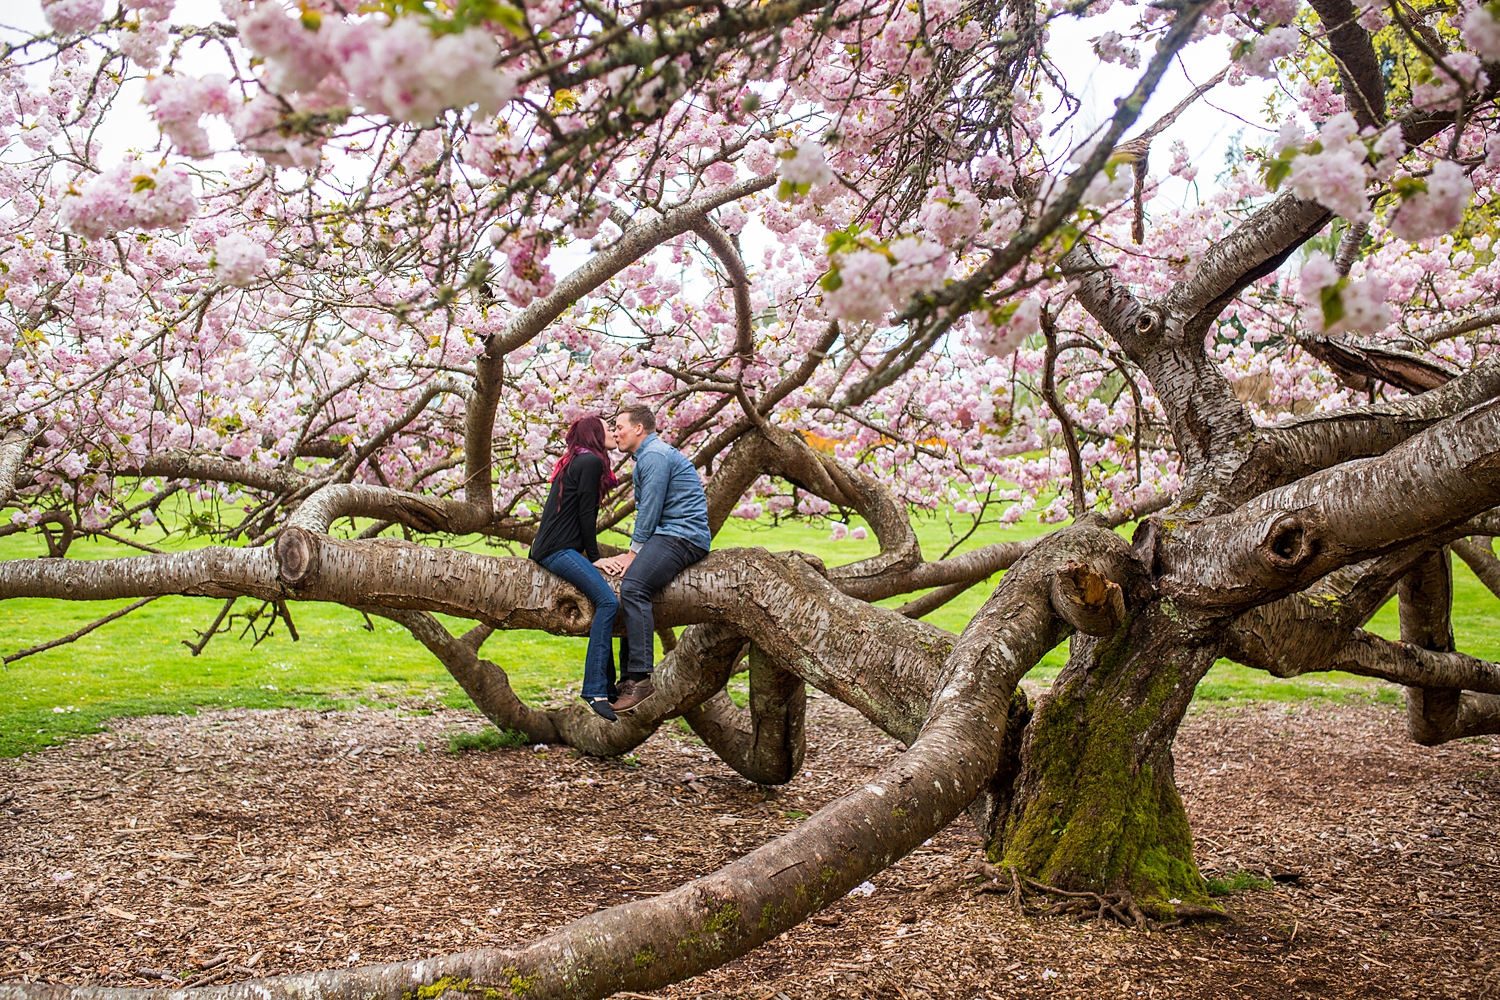 Tips for choosing the location for your engagement pictures: go to your favorite local park for spring blooms.